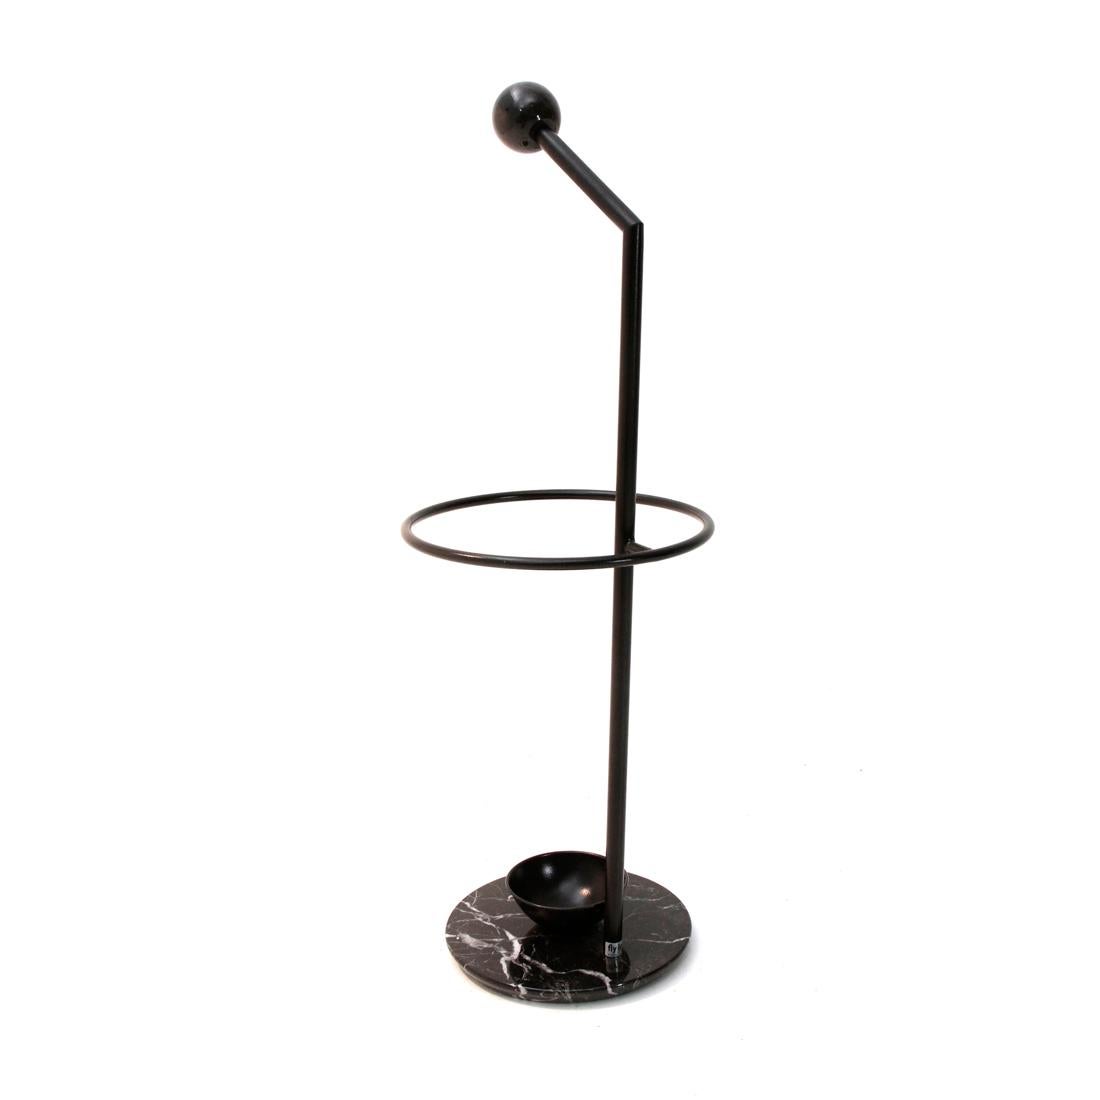 Umbrella stand produced in the 1980s by Fly Line.
Base and knob in black marble.
Stem in black painted metal.
Good general conditions, some signs due to normal use over time.

Dimensions: Diameter 30 cm, height 85 cm.
 